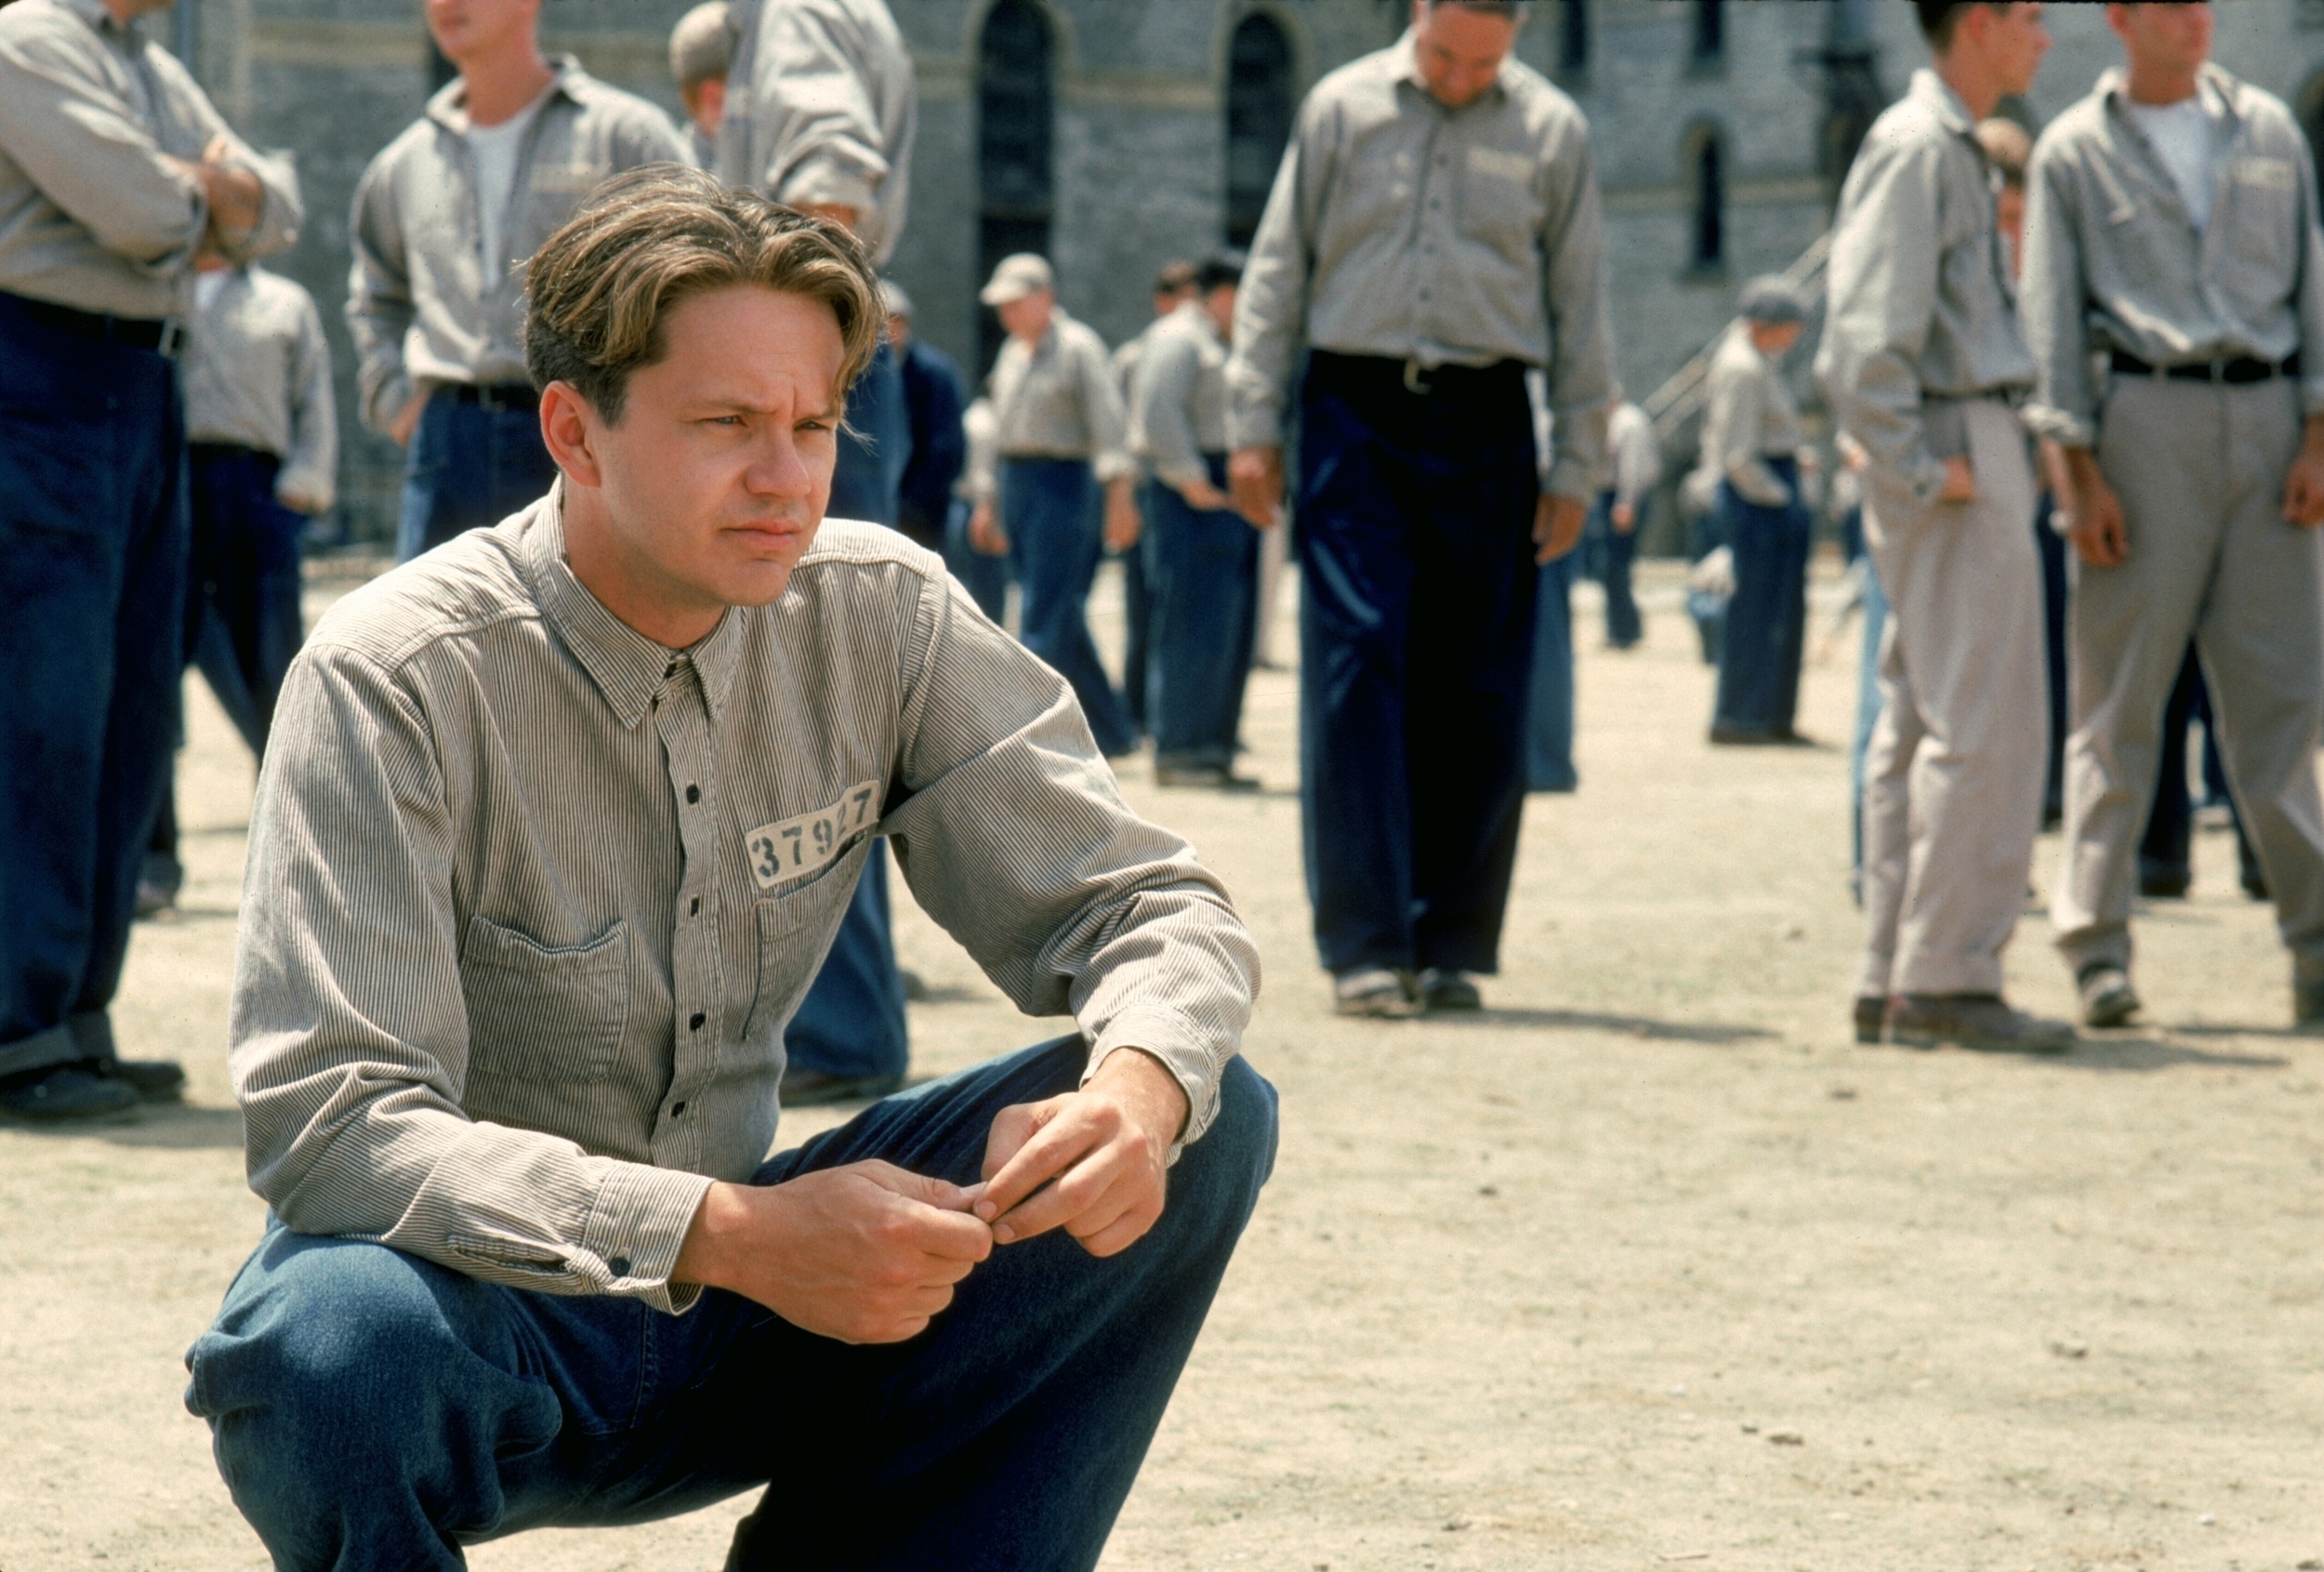 <p>Andy Dufresne is in prison for a murder he did not commit. While in prison, he uses his acumen with numbers to curry some favor by doing the books for the prison. That includes some, um, creative accounting, which is part of what inspired this line from Andy.</p><p><a href='https://www.msn.com/en-us/community/channel/vid-cj9pqbr0vn9in2b6ddcd8sfgpfq6x6utp44fssrv6mc2gtybw0us'>Follow us on MSN to see more of our exclusive entertainment content.</a></p>